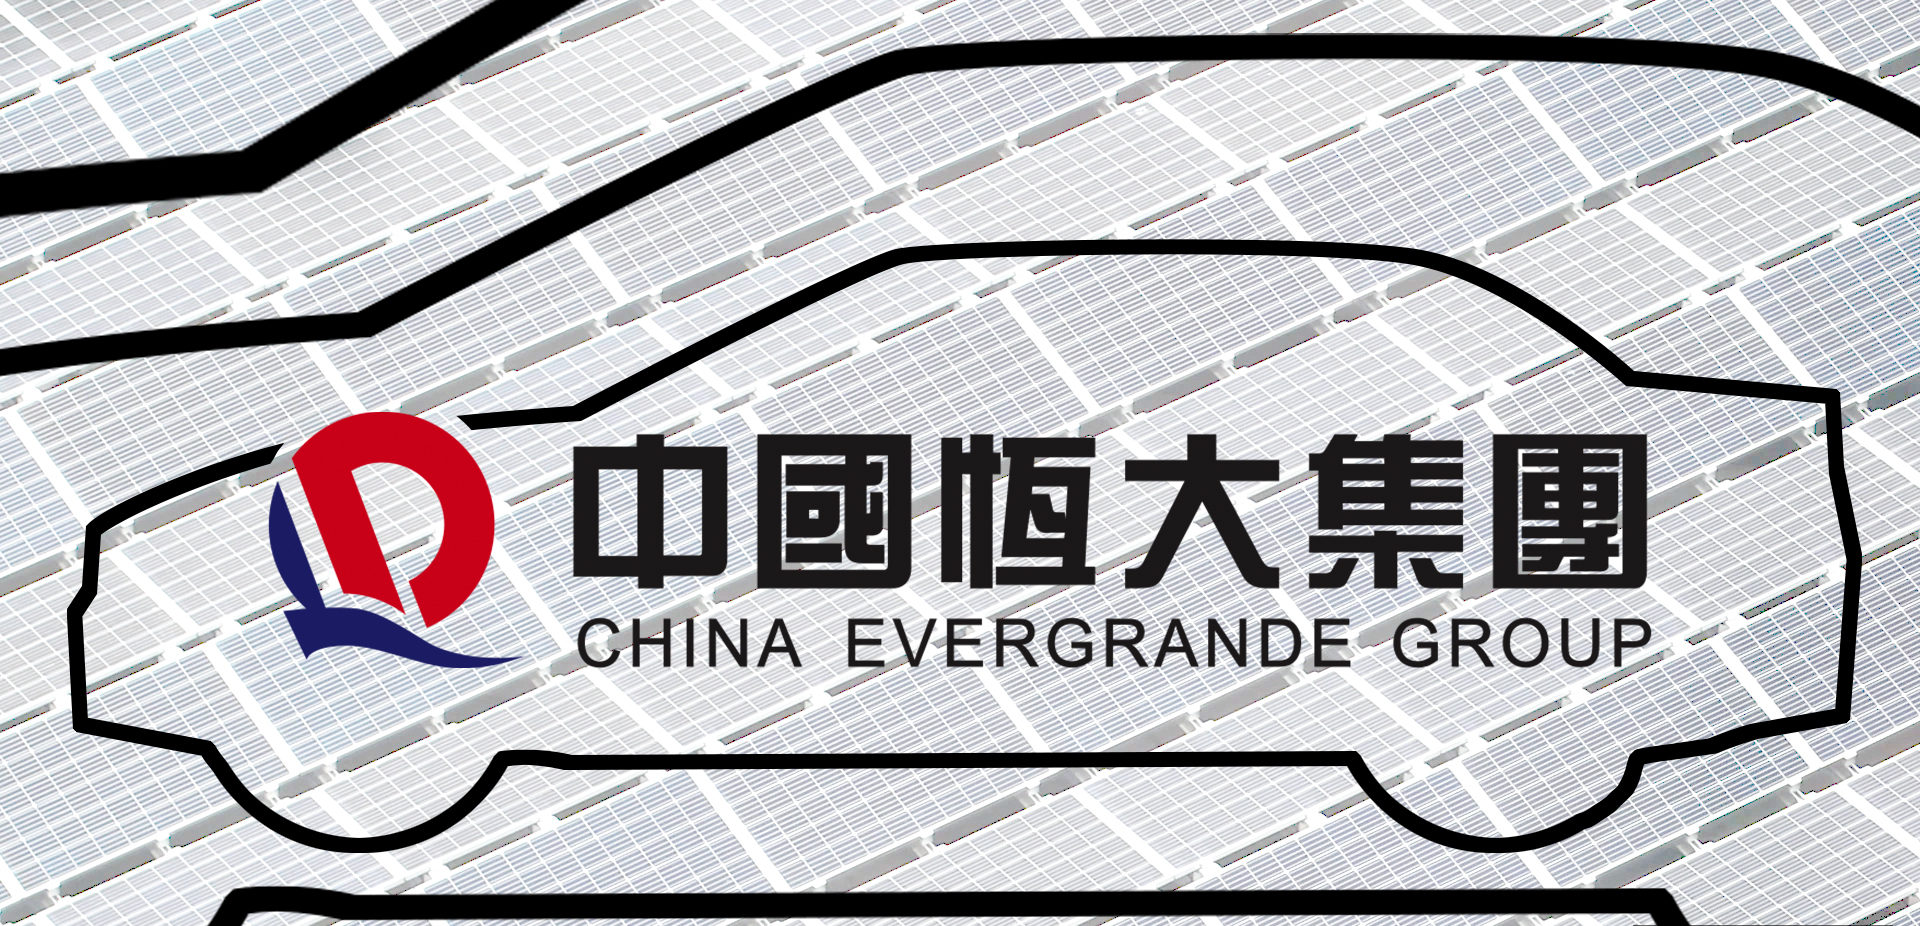 Video | Will real estate giant Evergrande succeed in the EV industry?